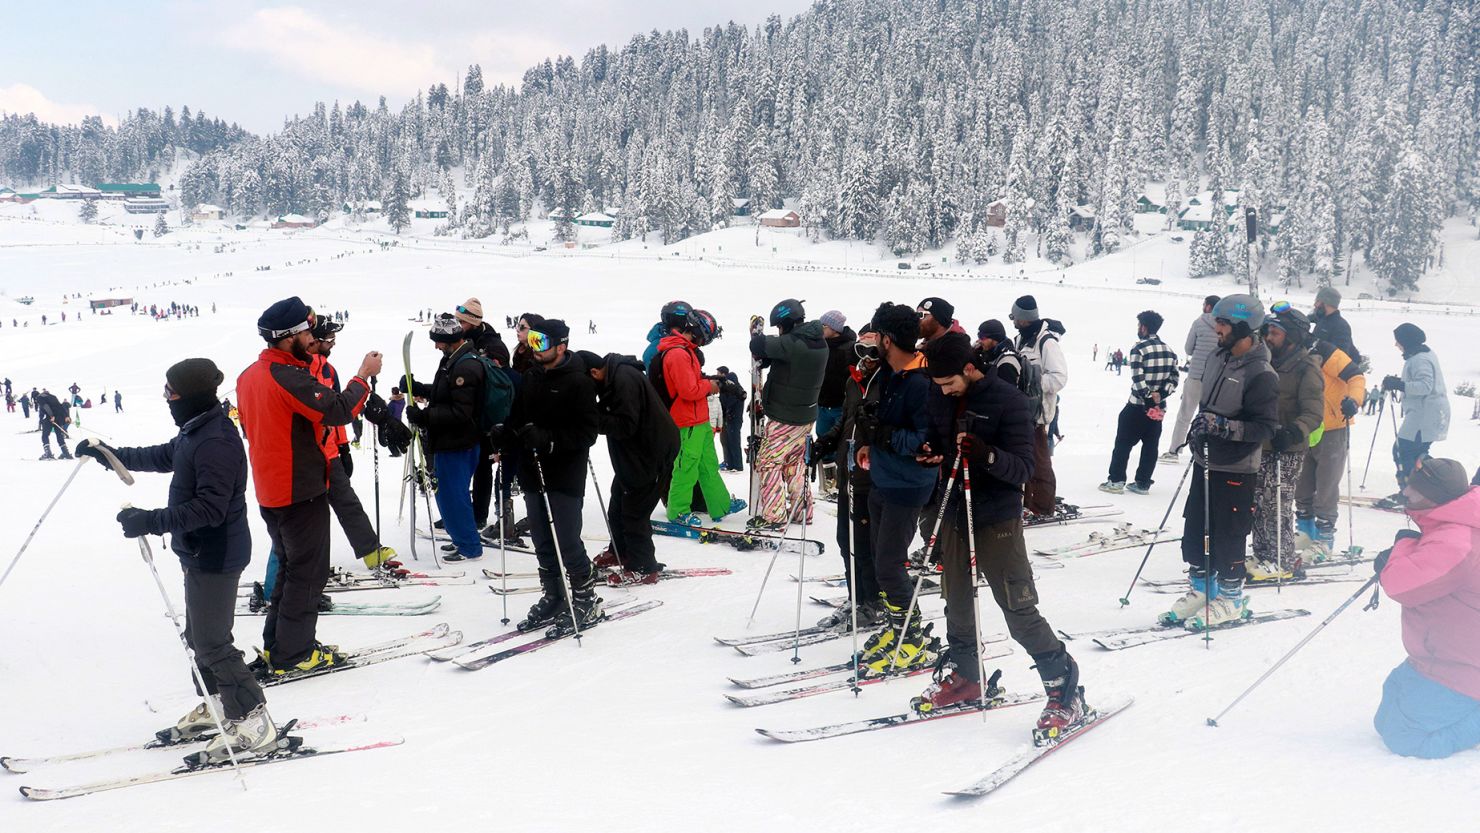 Snow has returned to the slopes of Gulmarg, one of the world's highest ski resorts.